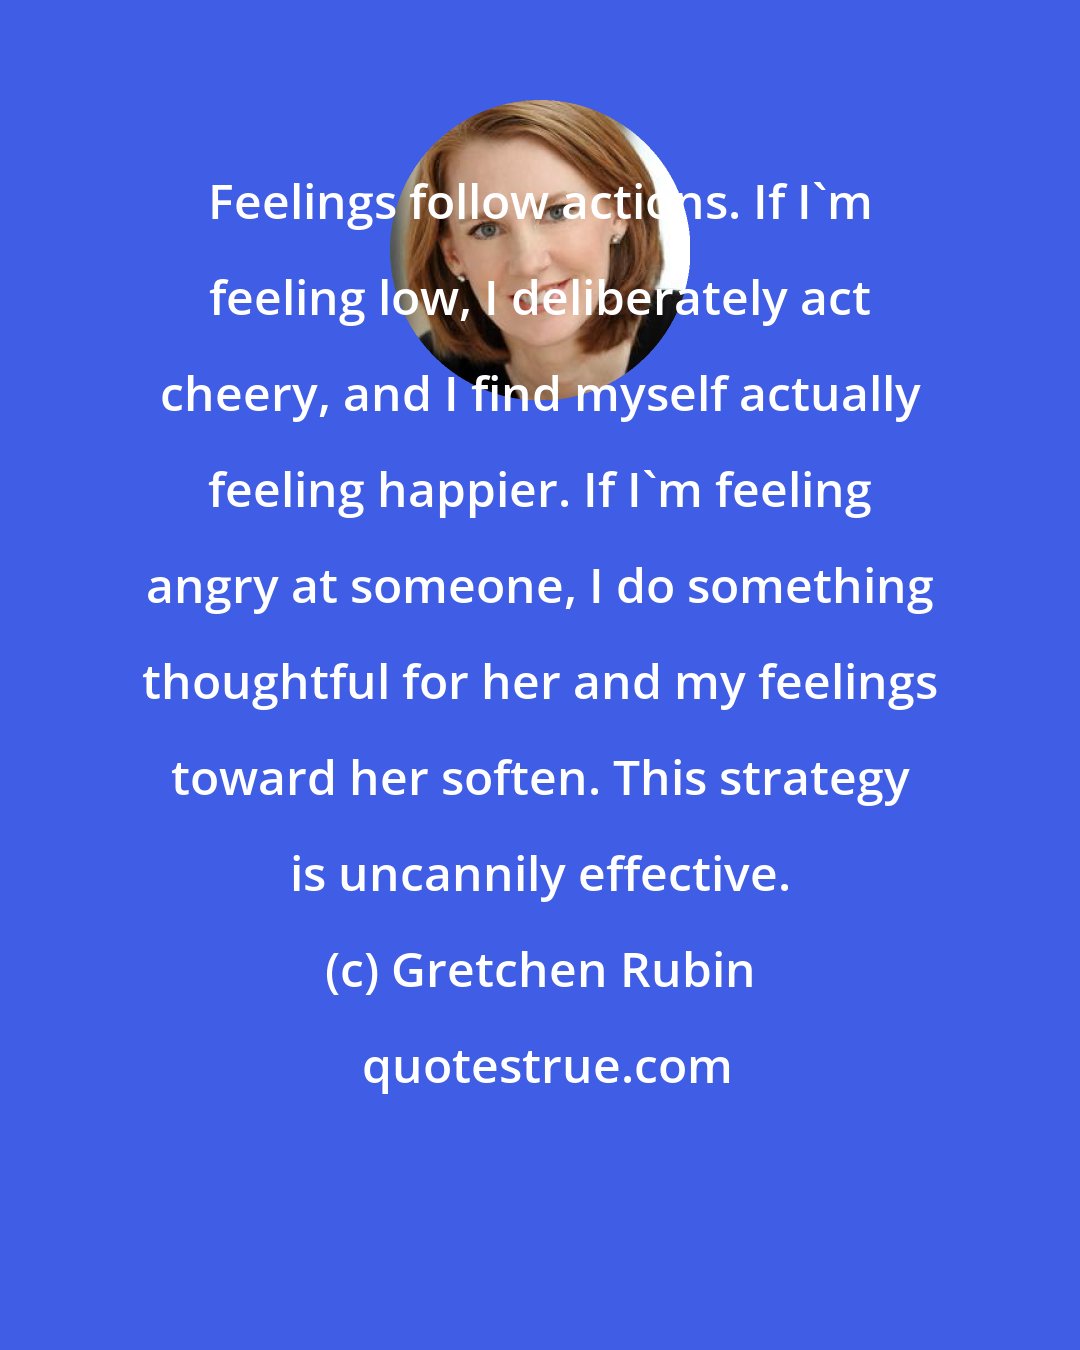 Gretchen Rubin: Feelings follow actions. If I'm feeling low, I deliberately act cheery, and I find myself actually feeling happier. If I'm feeling angry at someone, I do something thoughtful for her and my feelings toward her soften. This strategy is uncannily effective.